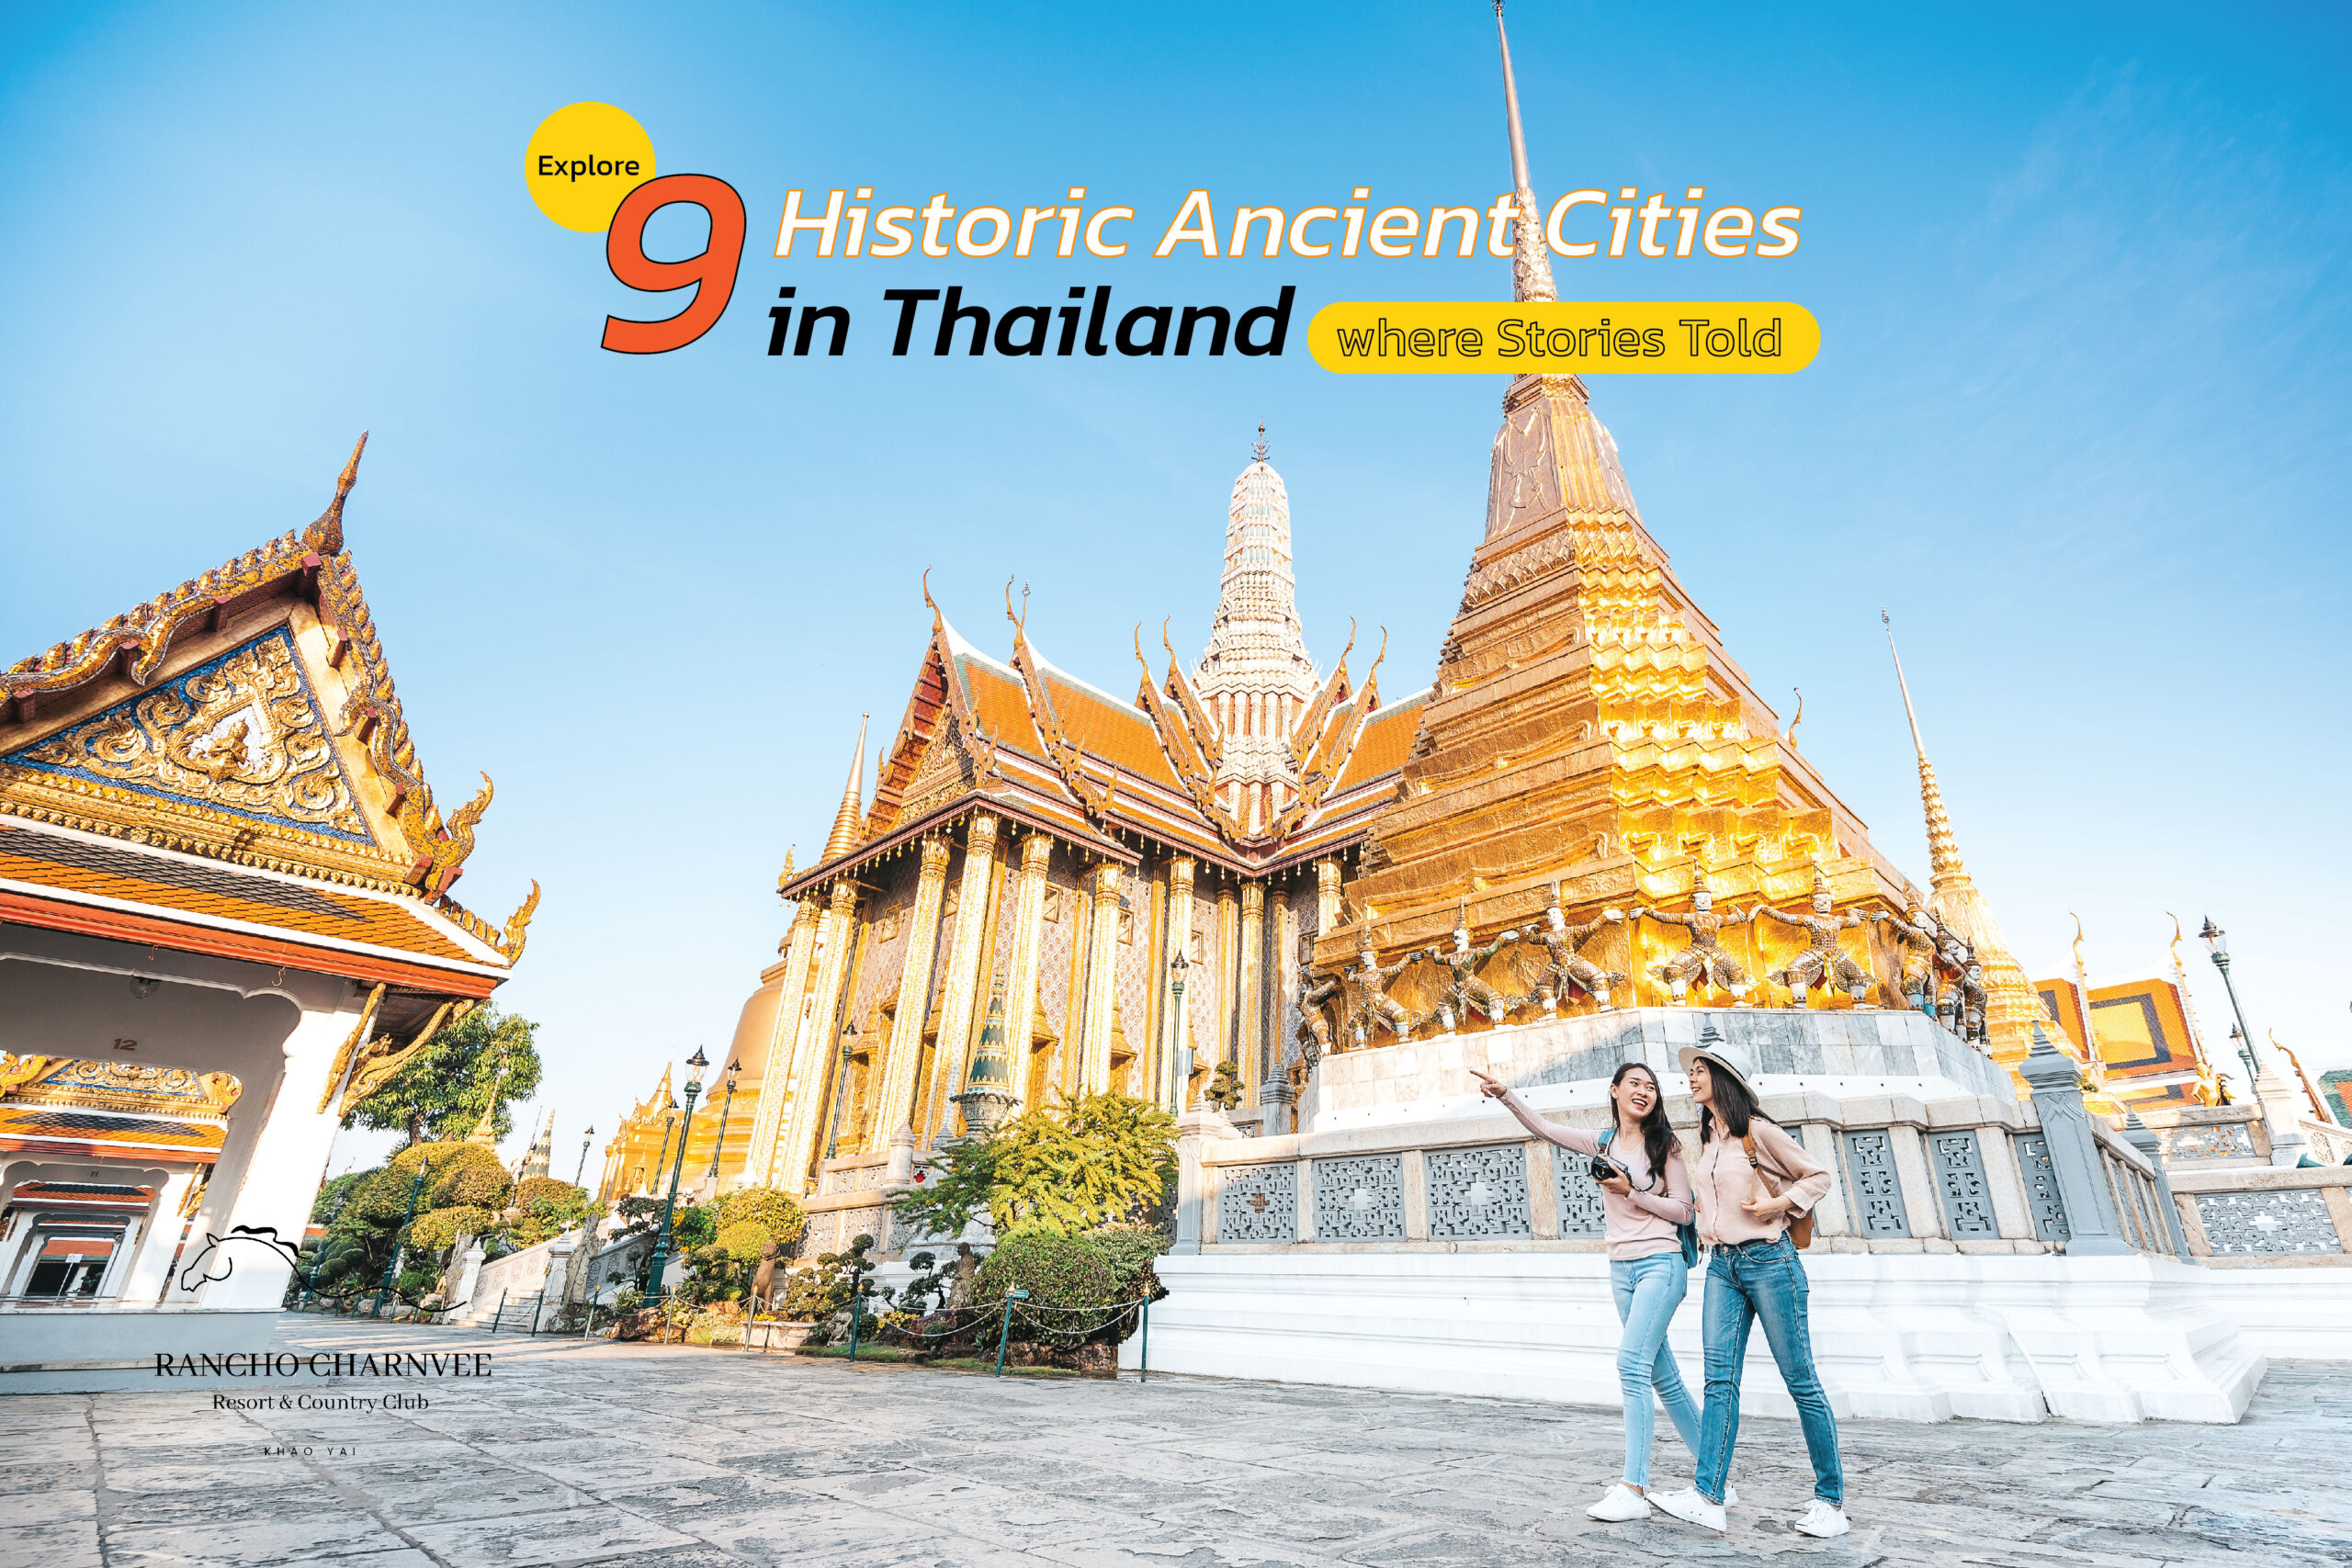 Explore 9 Historic Ancient Cities in Thailand where Stories Told